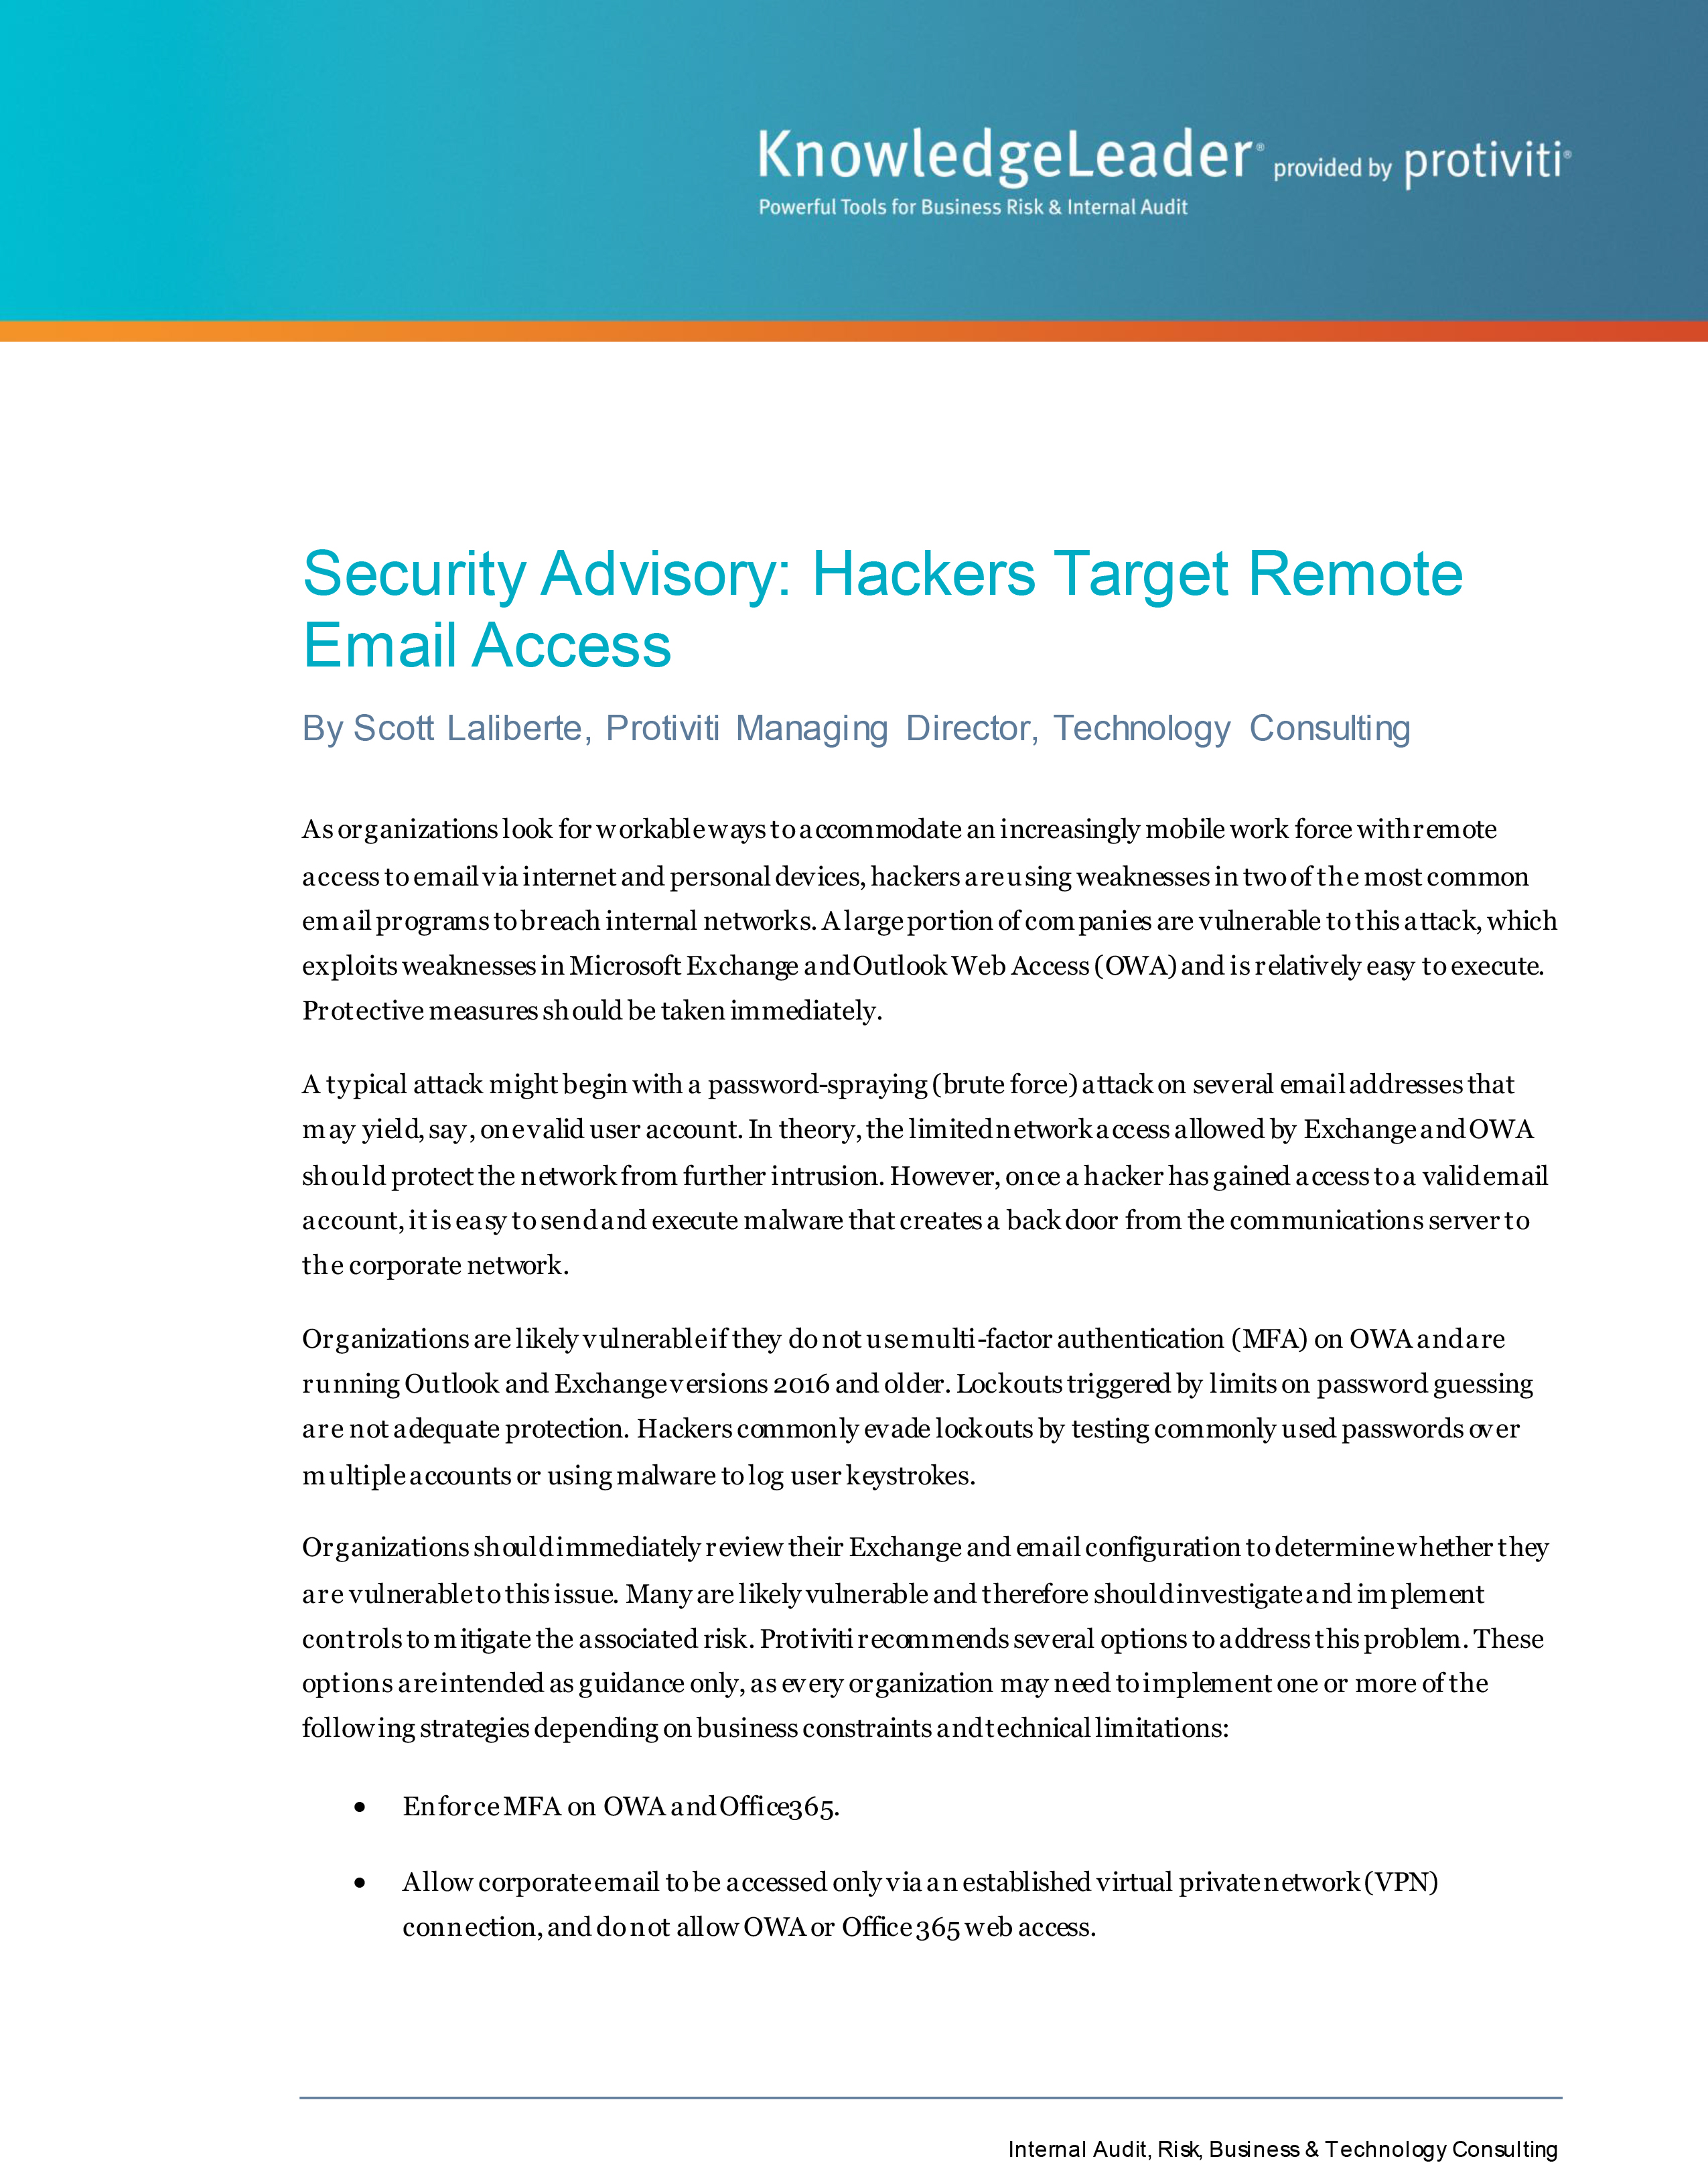 Screenshot of the first page of Security Advisory: Hackers Target Remote Email Access